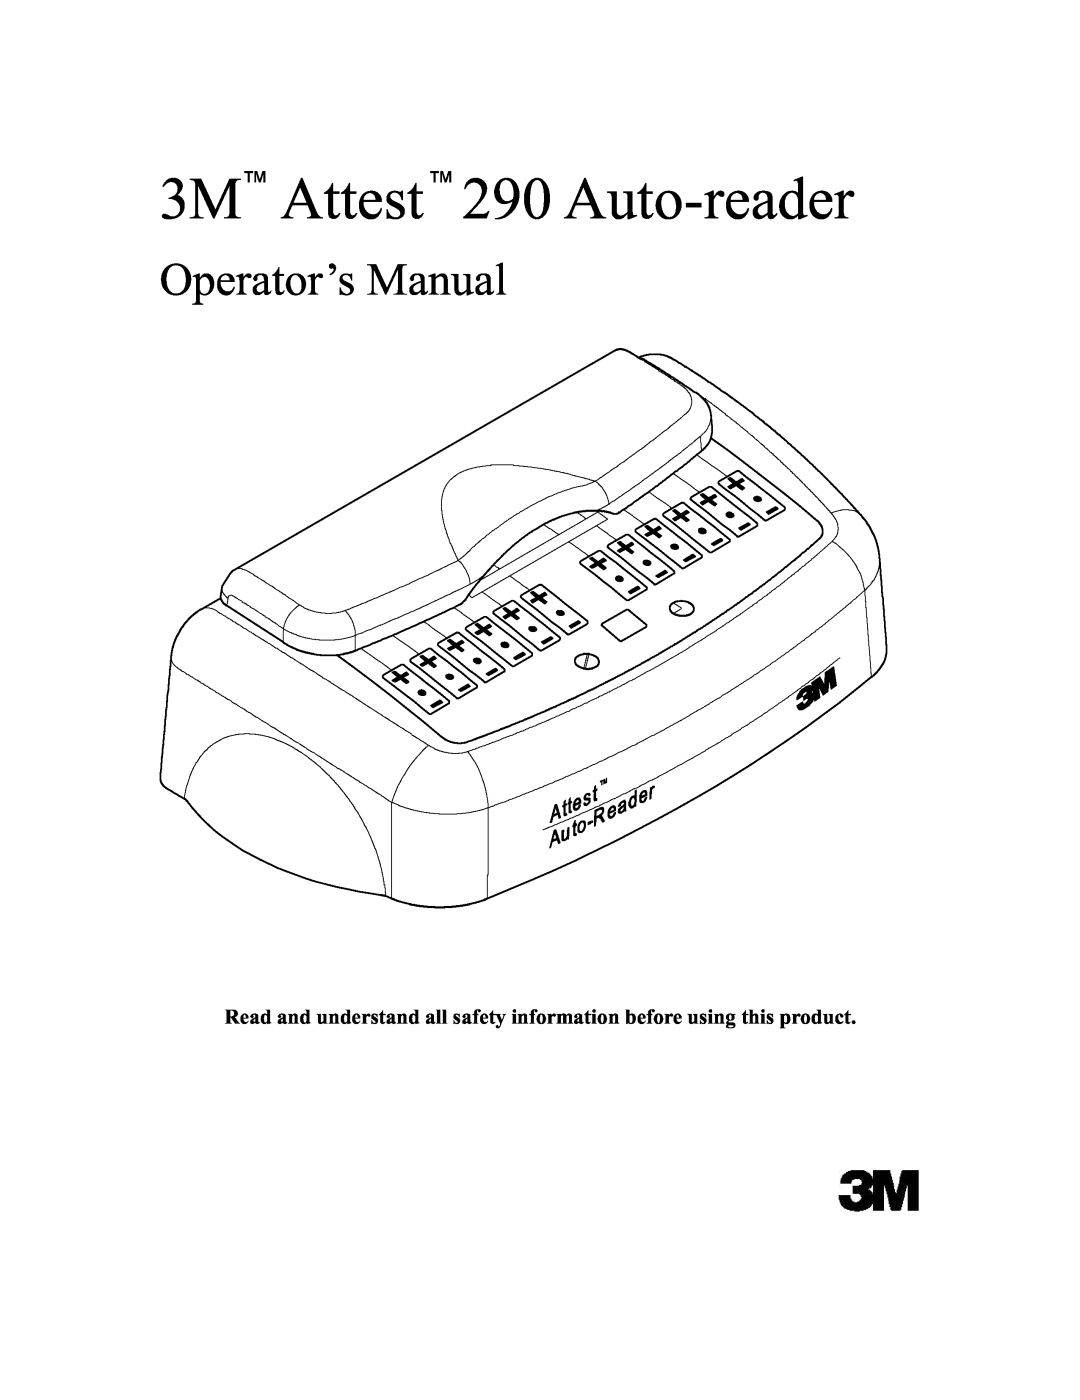 3M manual 3M Attest 290 Auto-reader, Operator’s Manual 